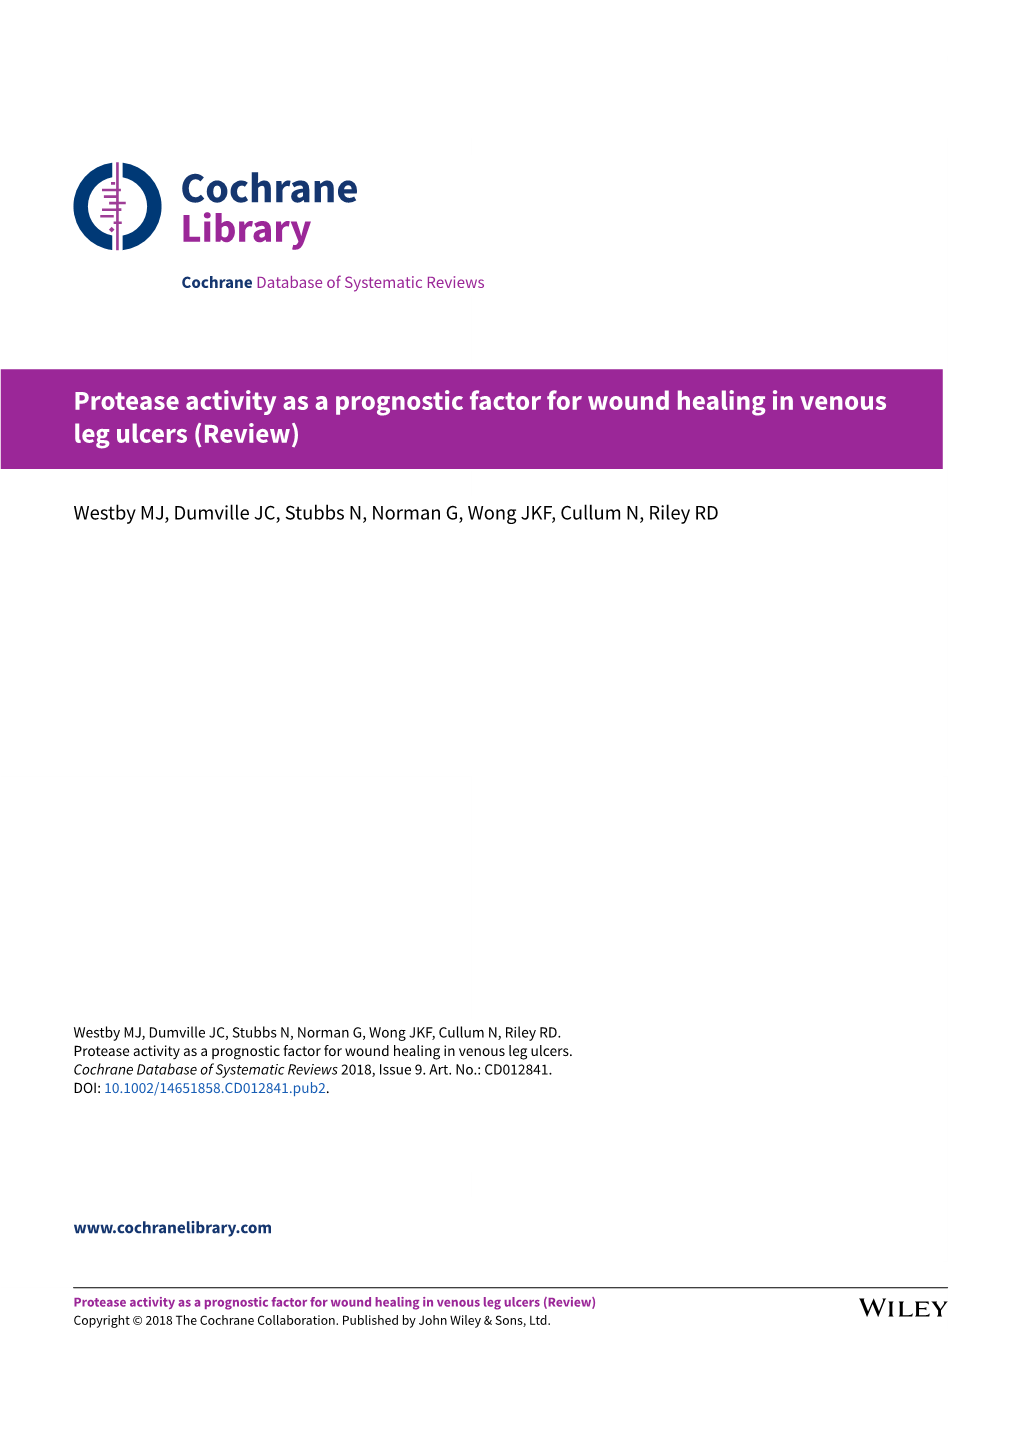 Protease Activity As a Prognostic Factor for Wound Healing in Venous Leg Ulcers (Review)